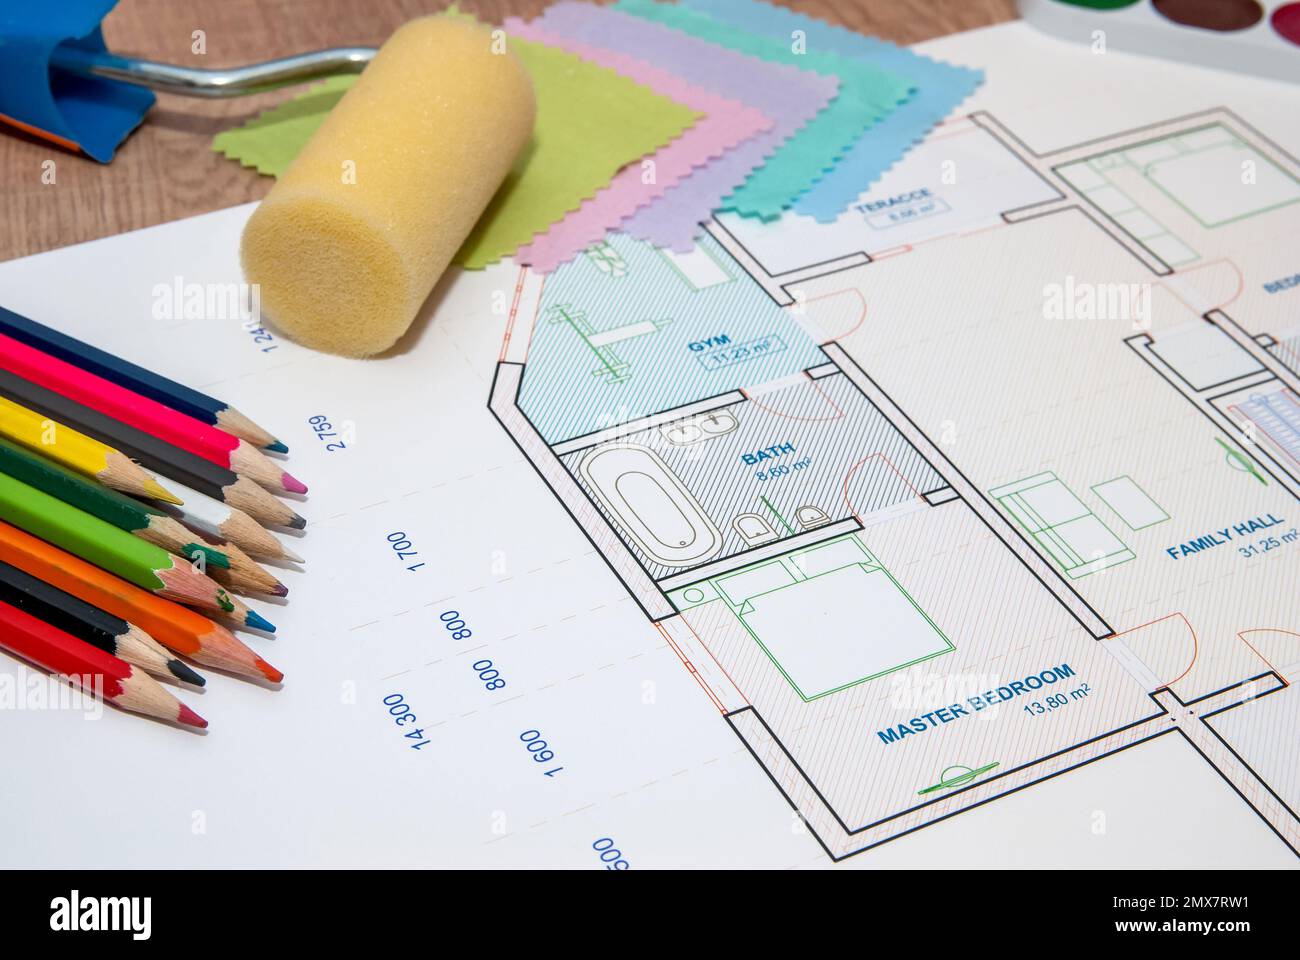 architectural plan of the house with color palette, pencil and fabric samples Stock Photo